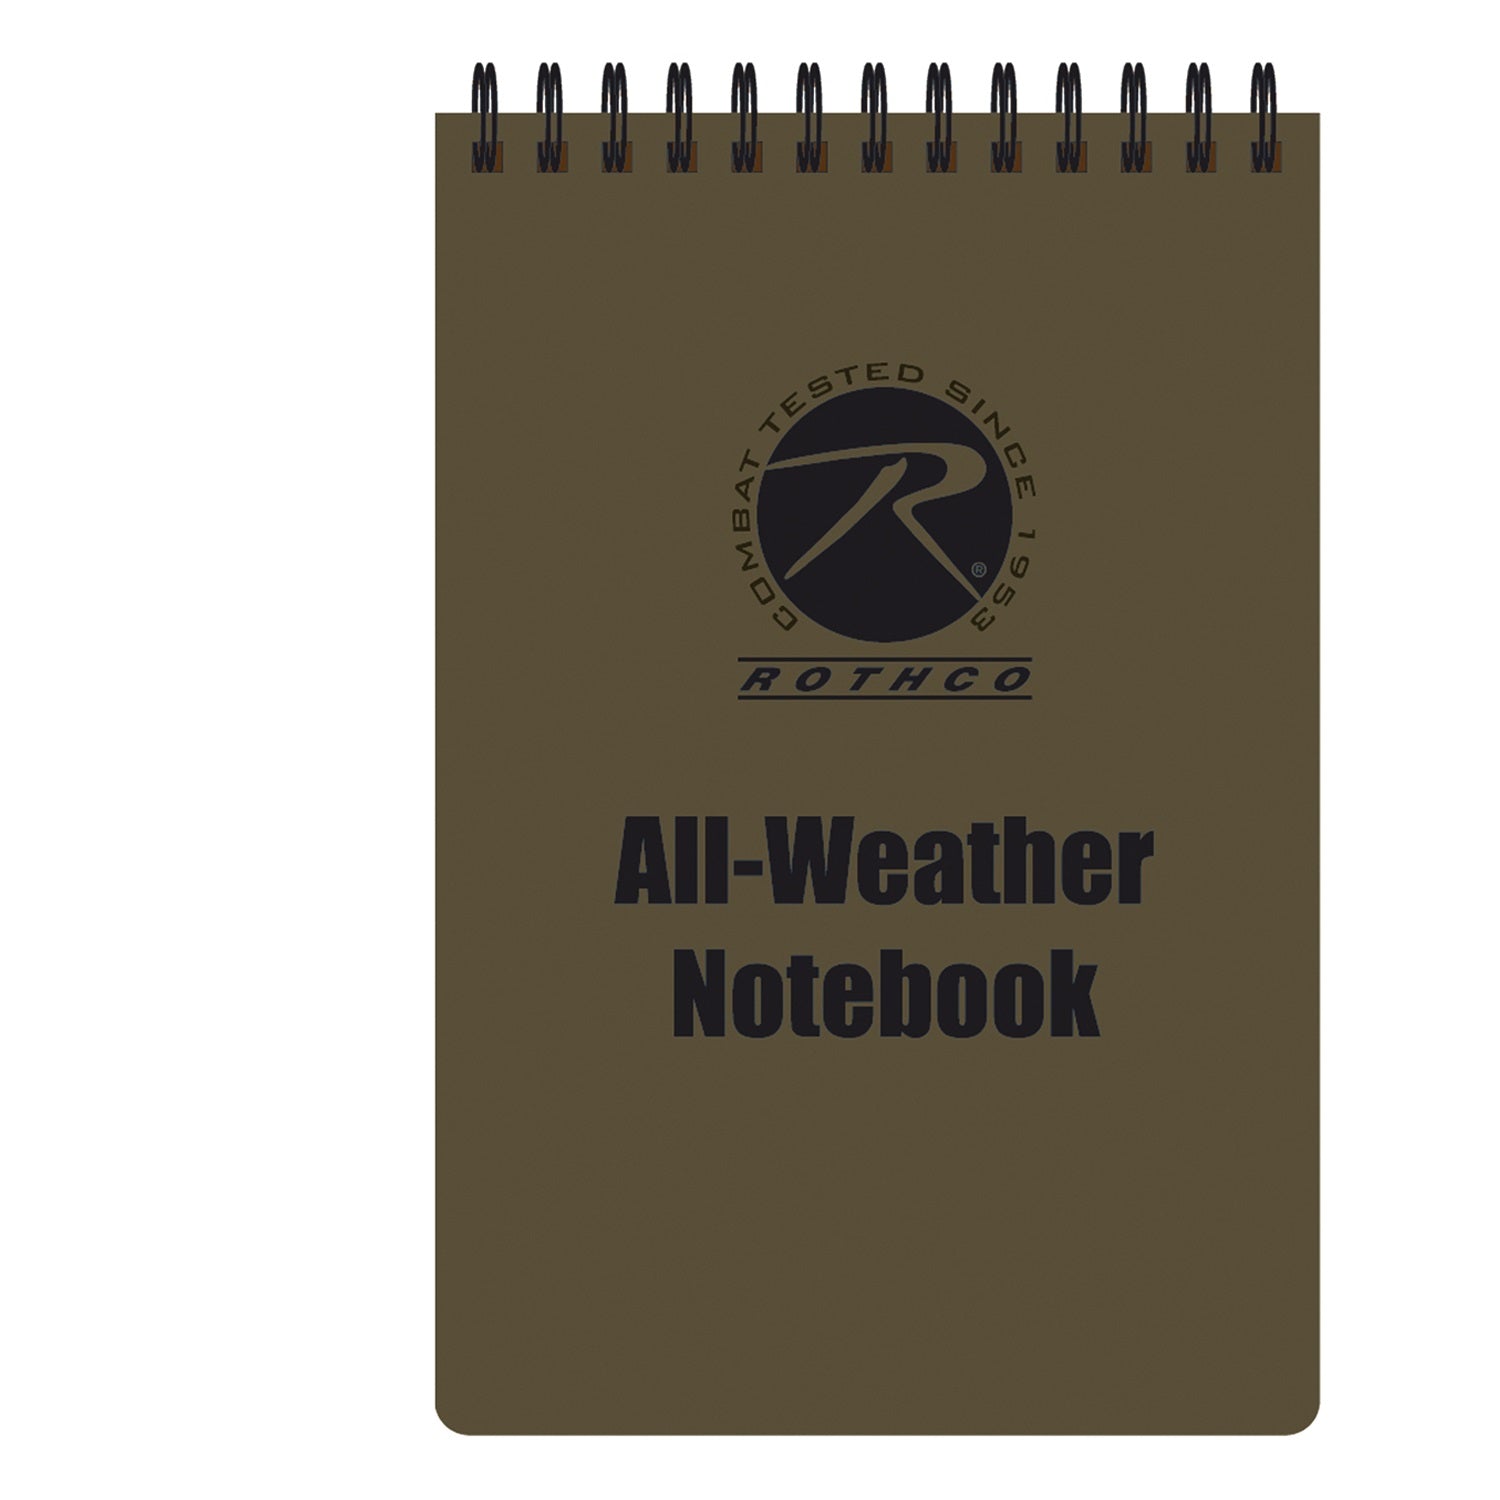 Rothco All Weather Waterproof Notebook Coyote Brown